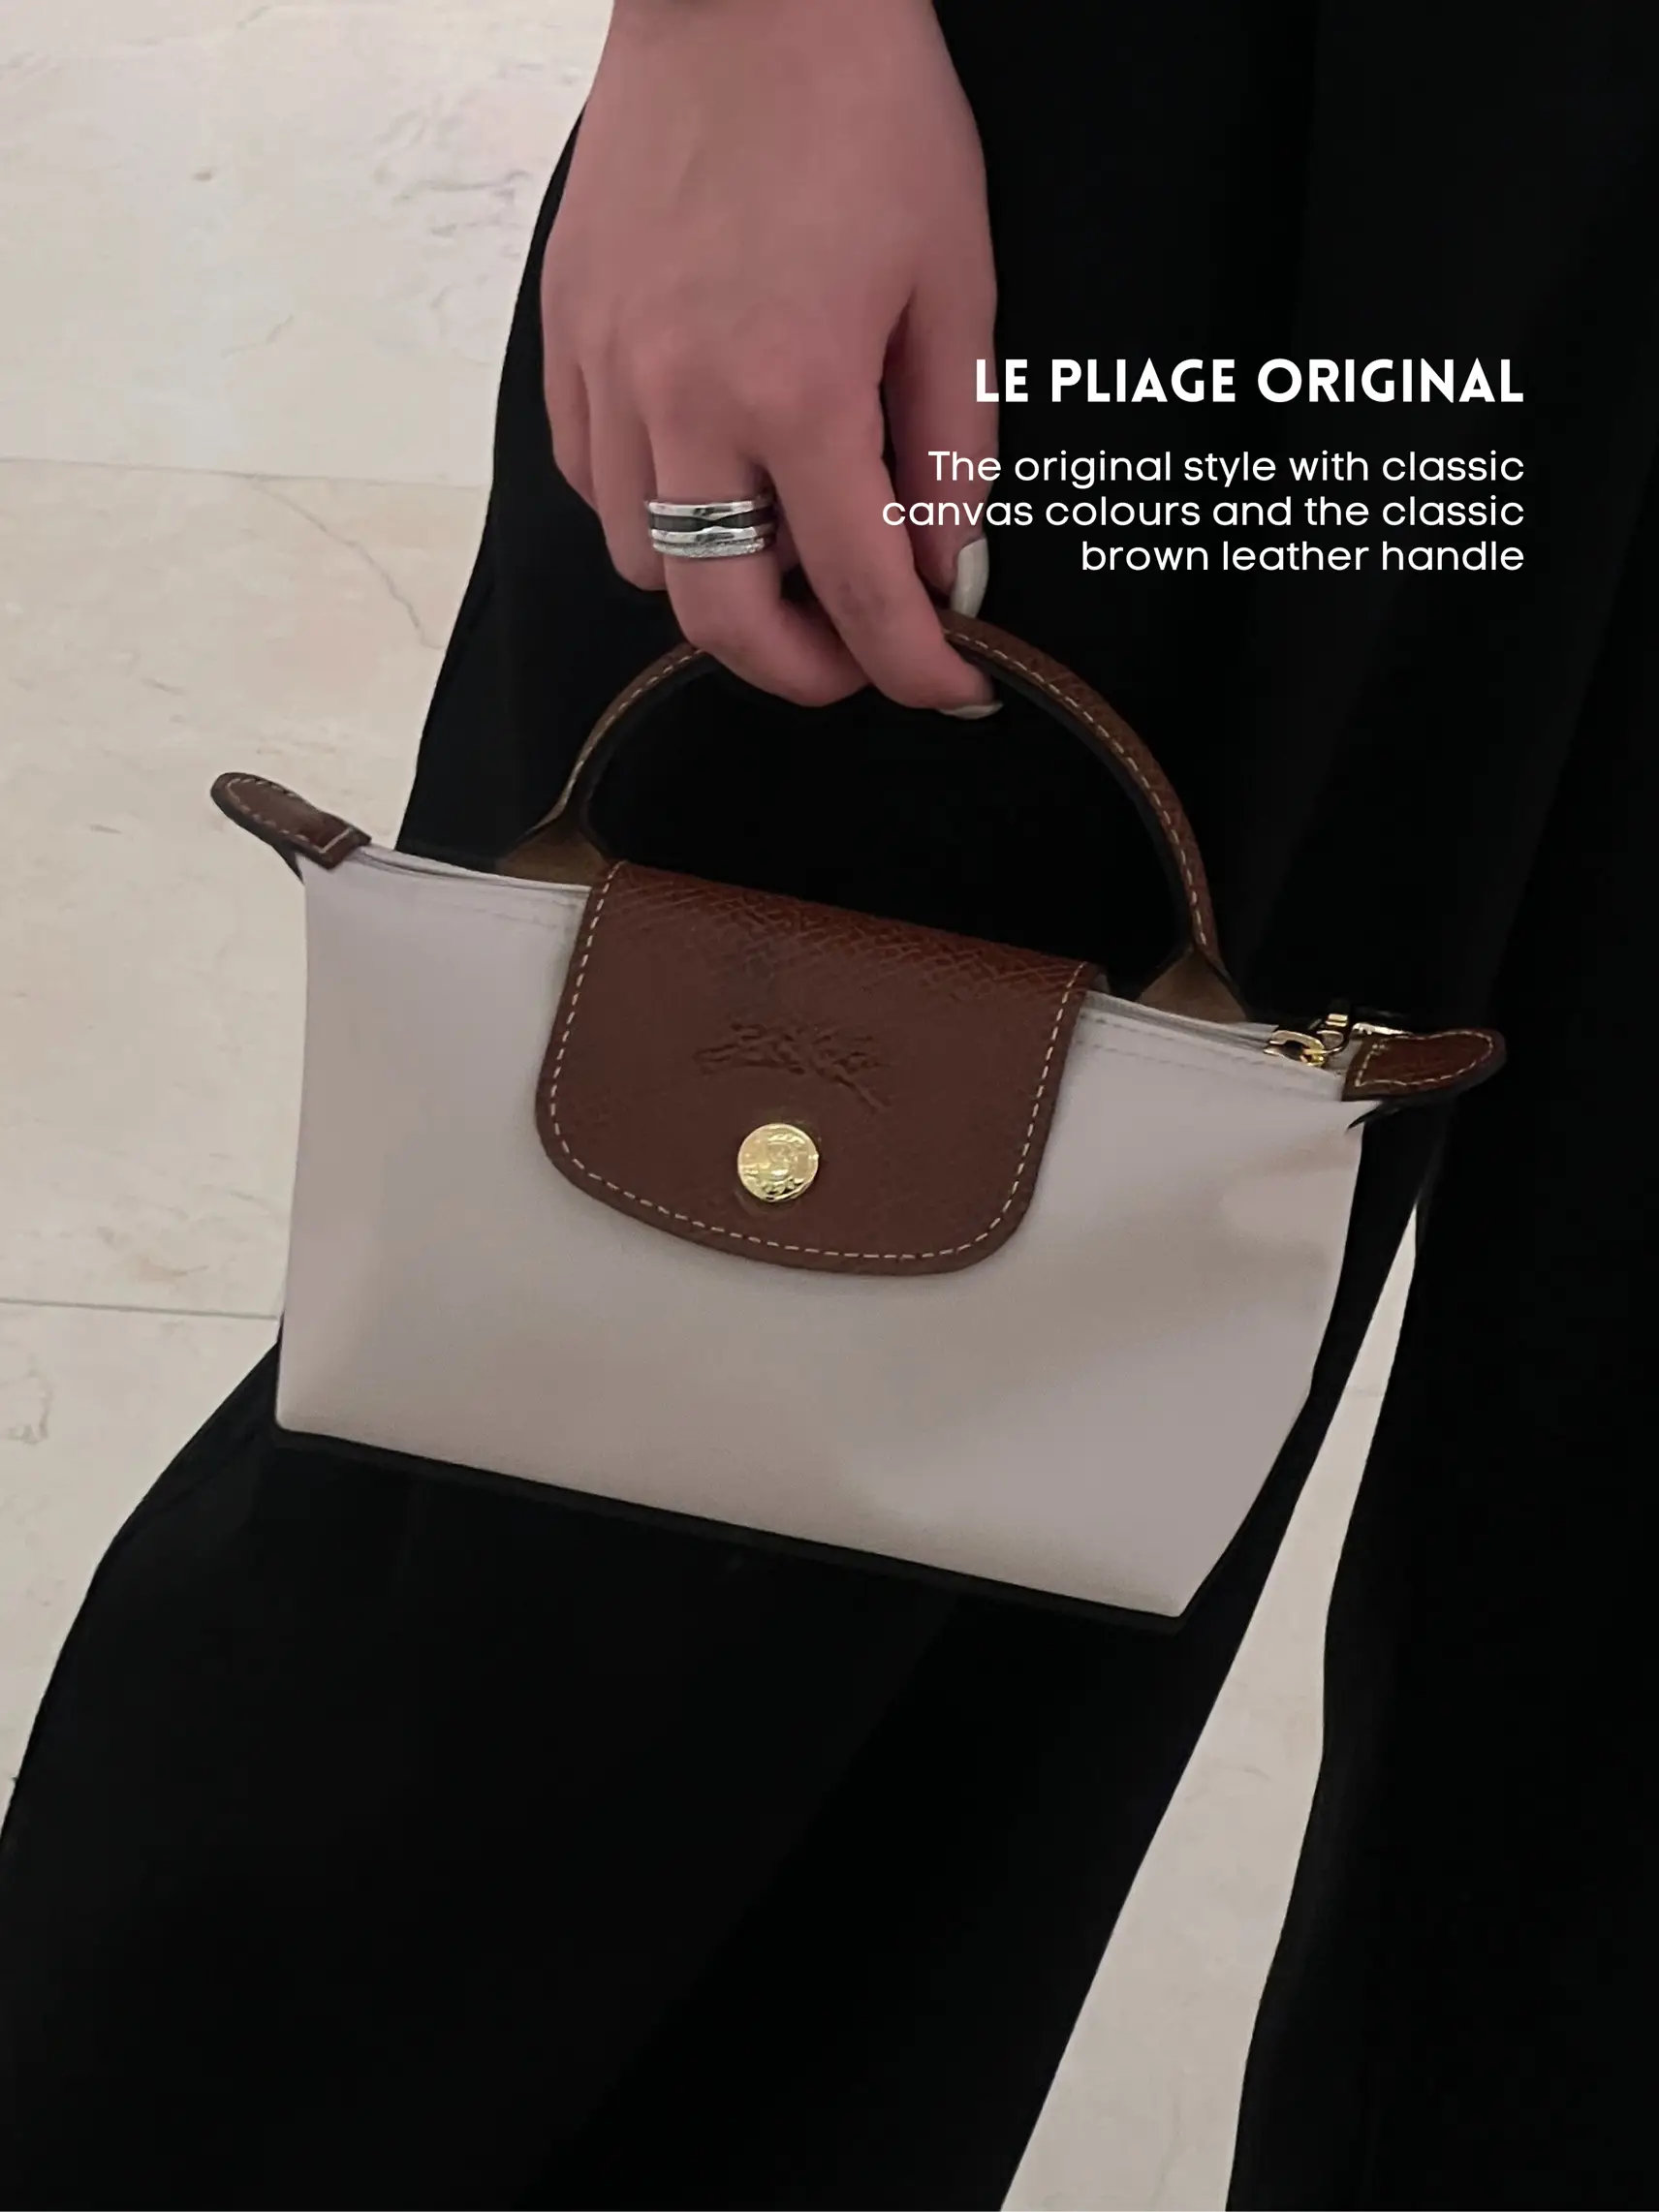 The TRENDING Longchamp Mini “Bag”, Gallery posted by anne